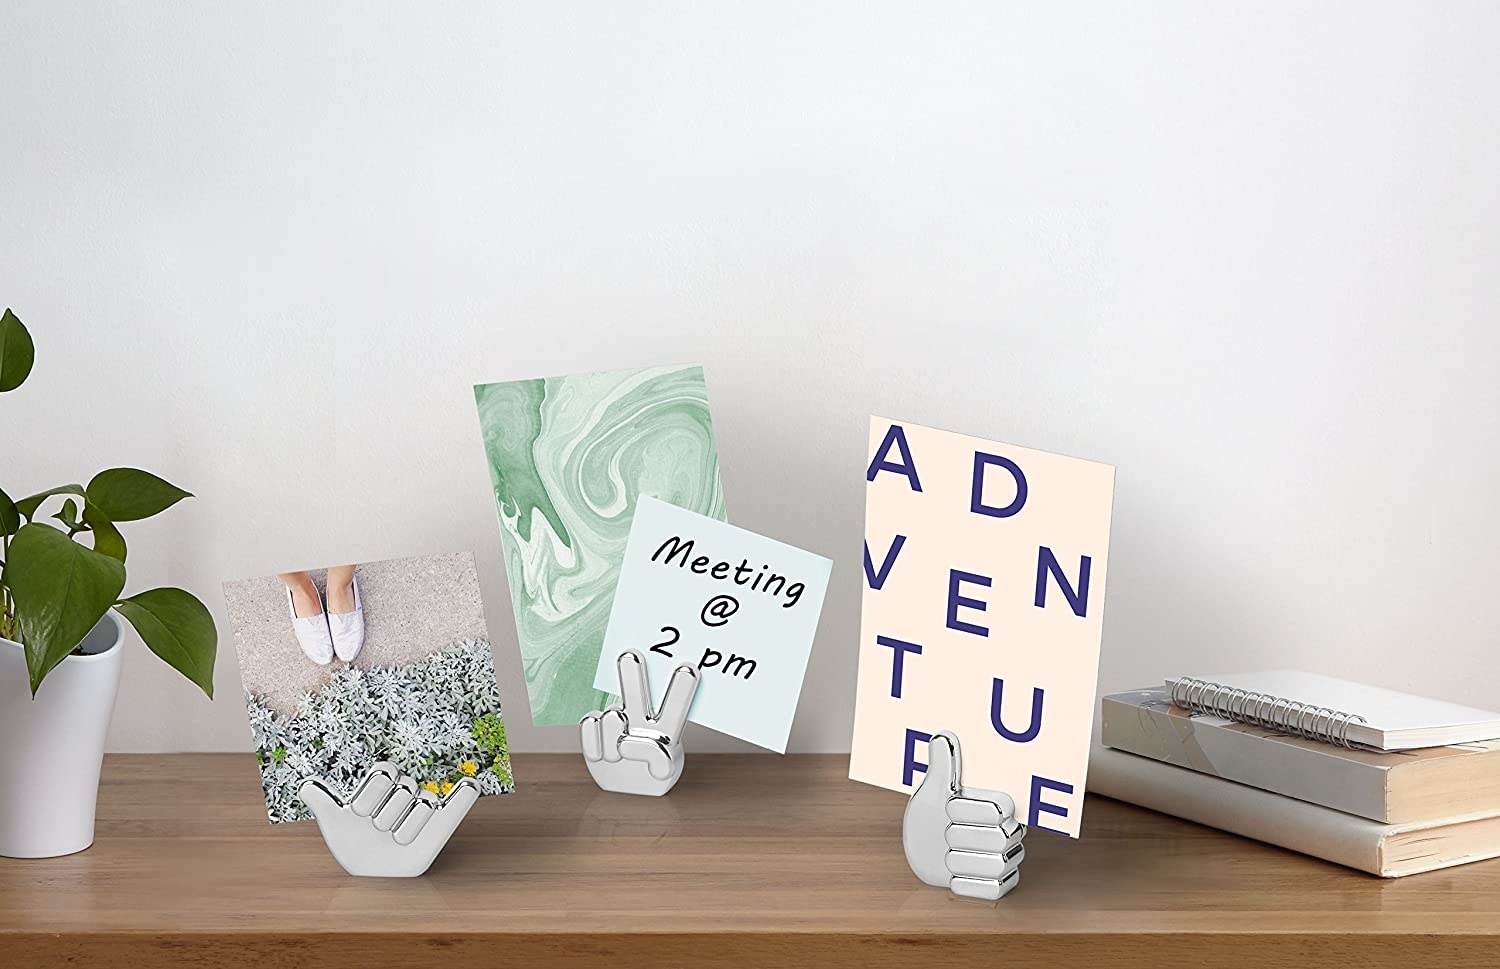 three hand shaped photo stands holding prints and notes on a desk